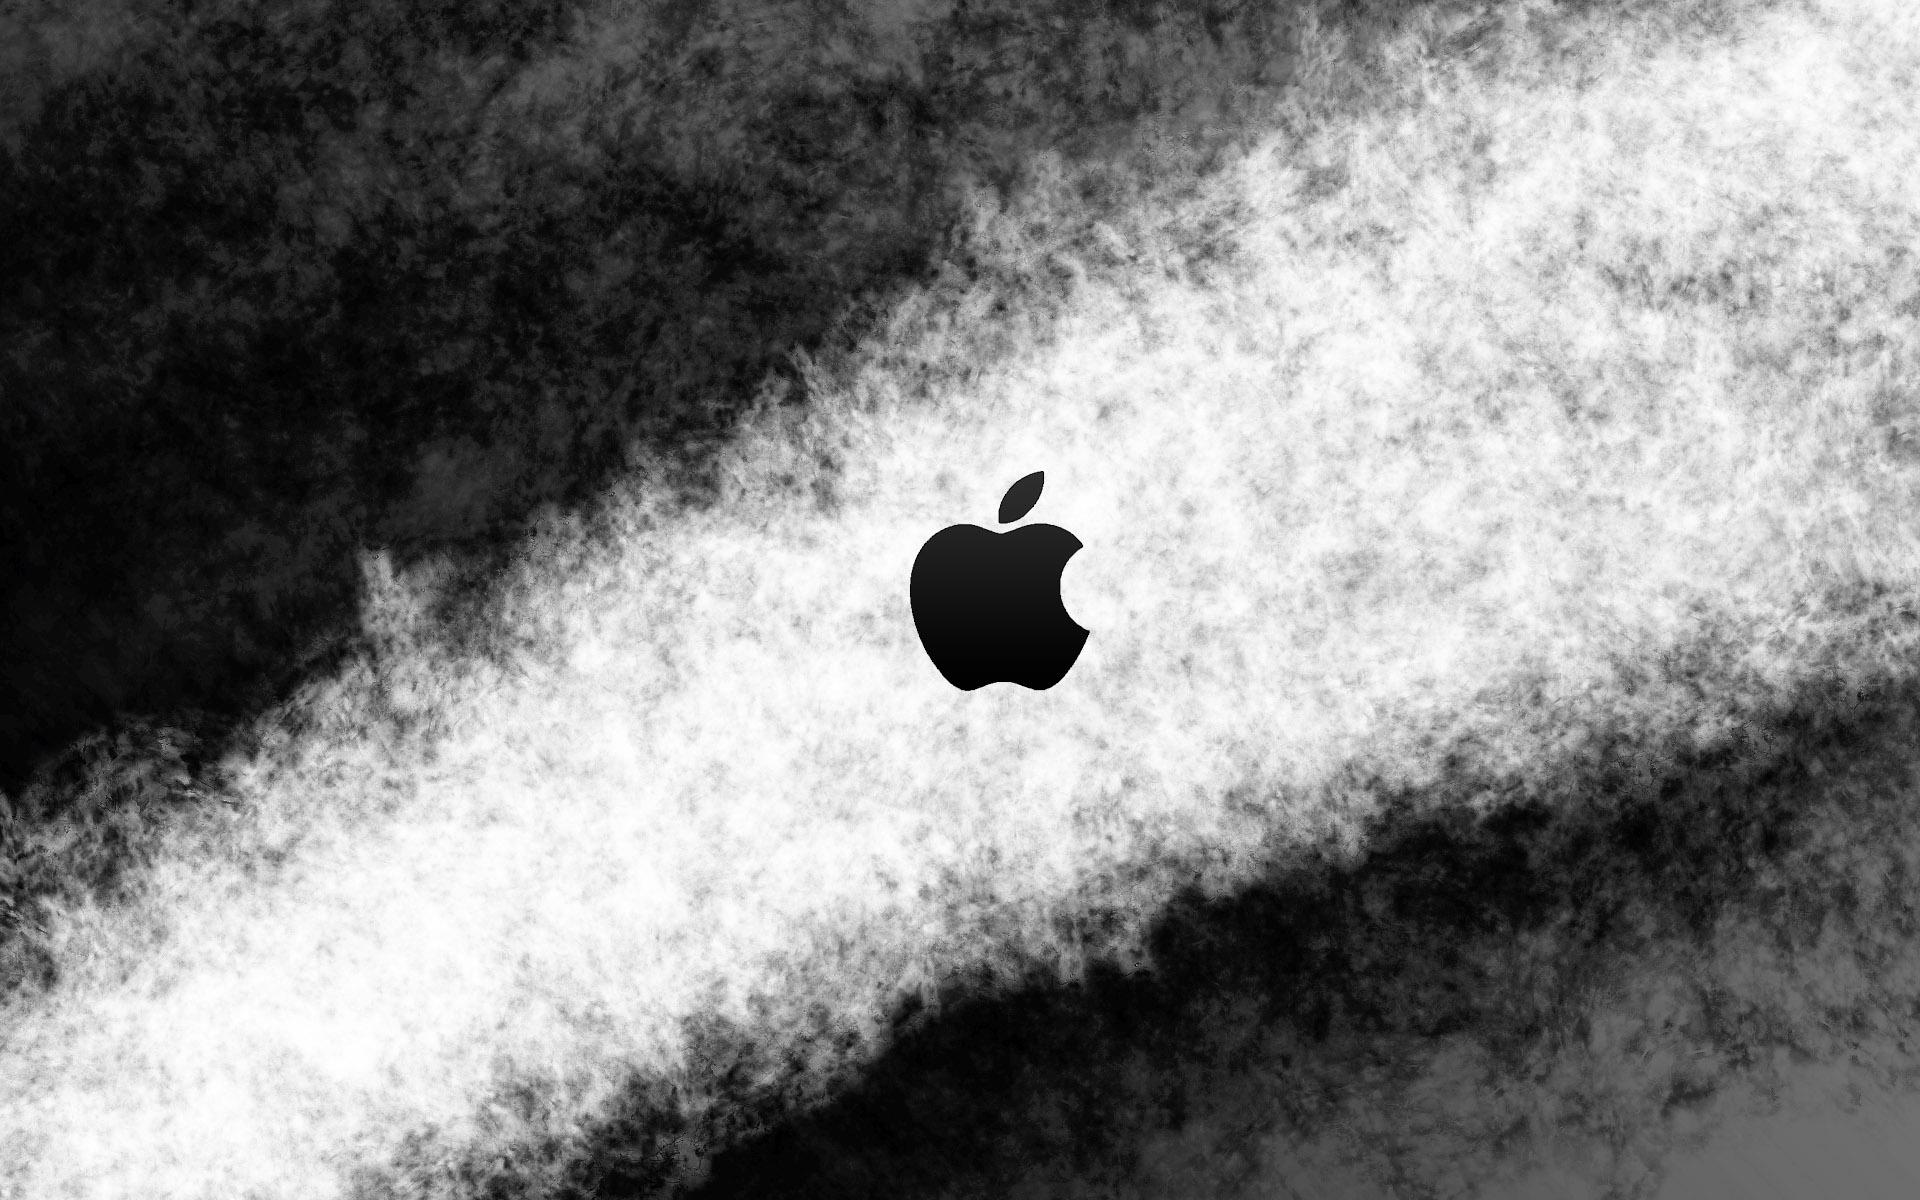 Black and white apple logo wallpaper with a black and white background - Black and white